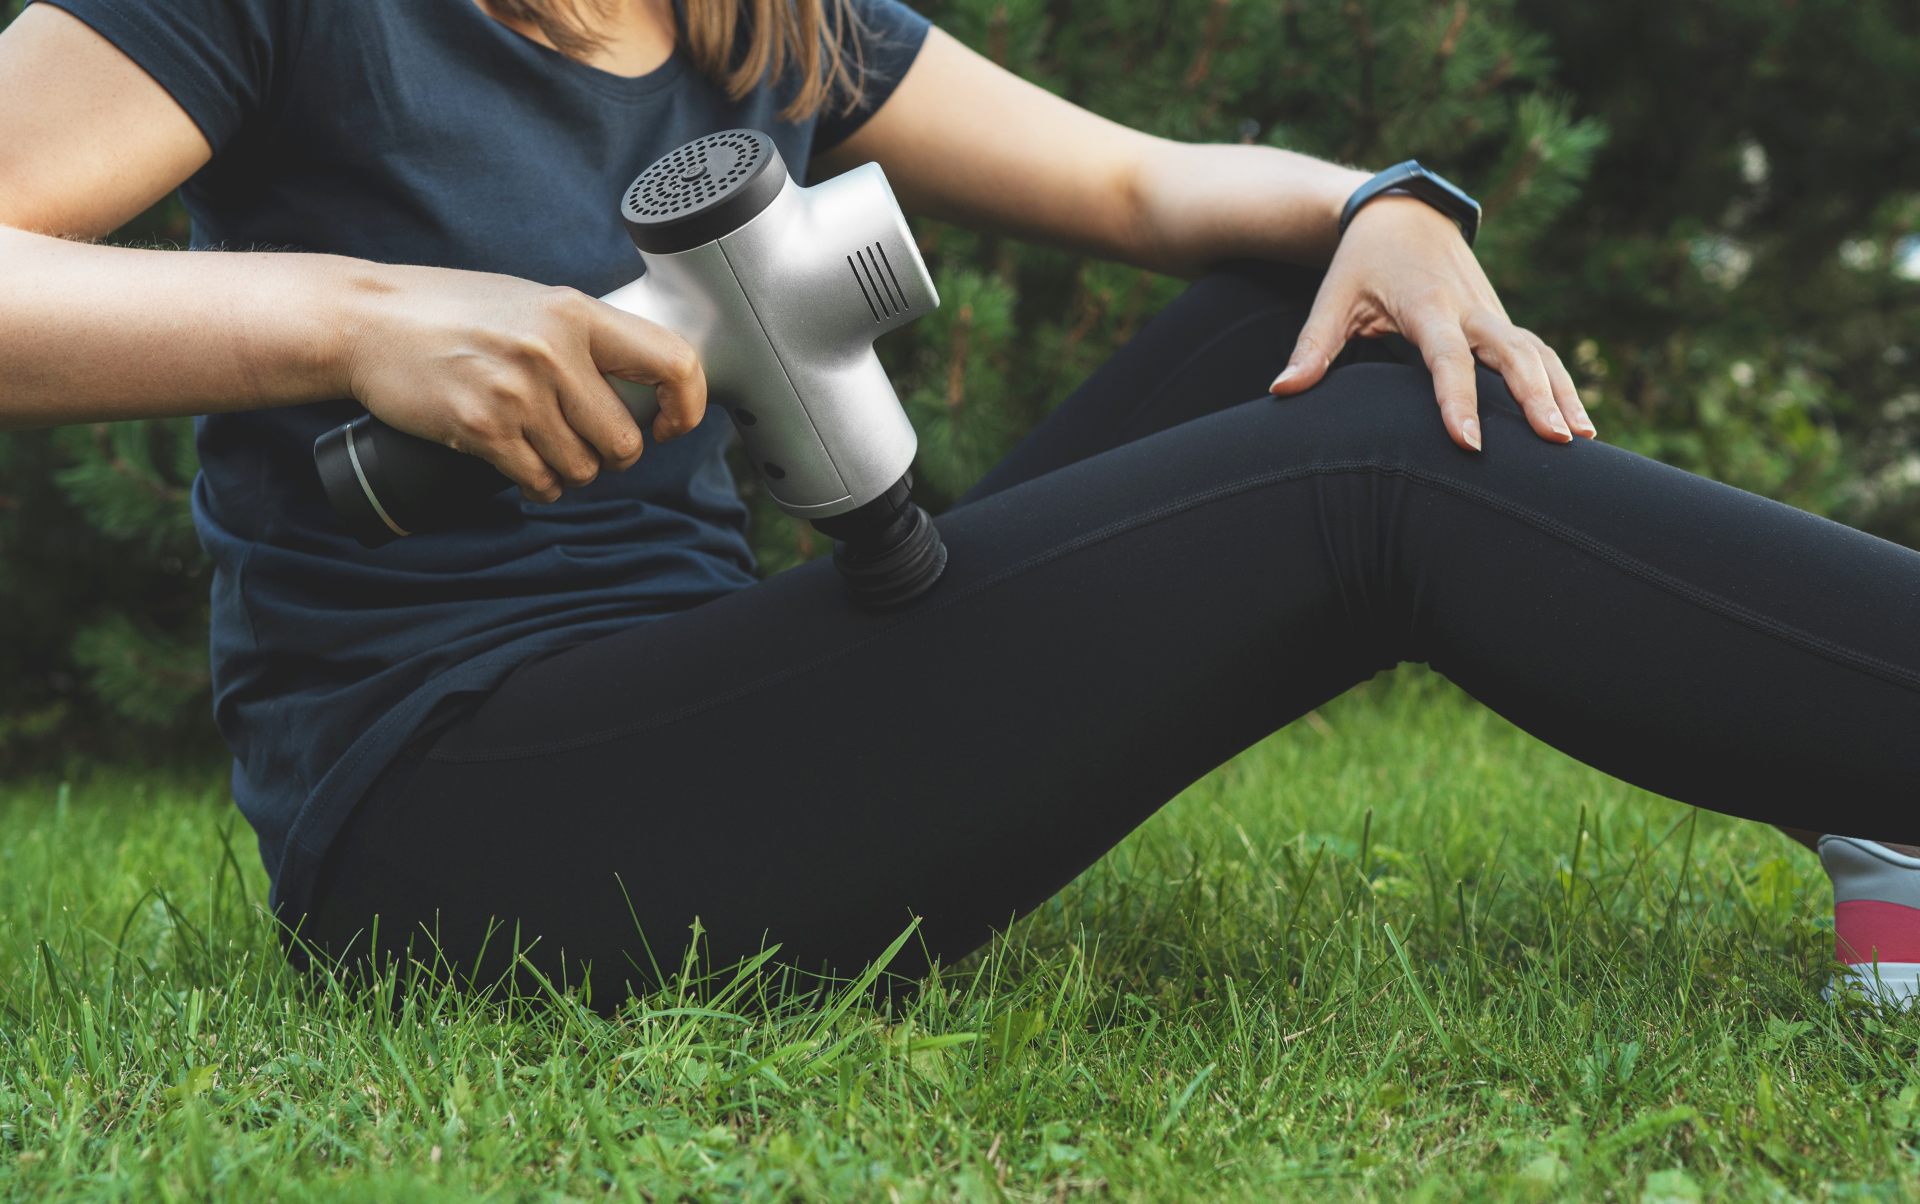 A woman in black workout clothing uses a percussion massager on her leg while sitting on the grass